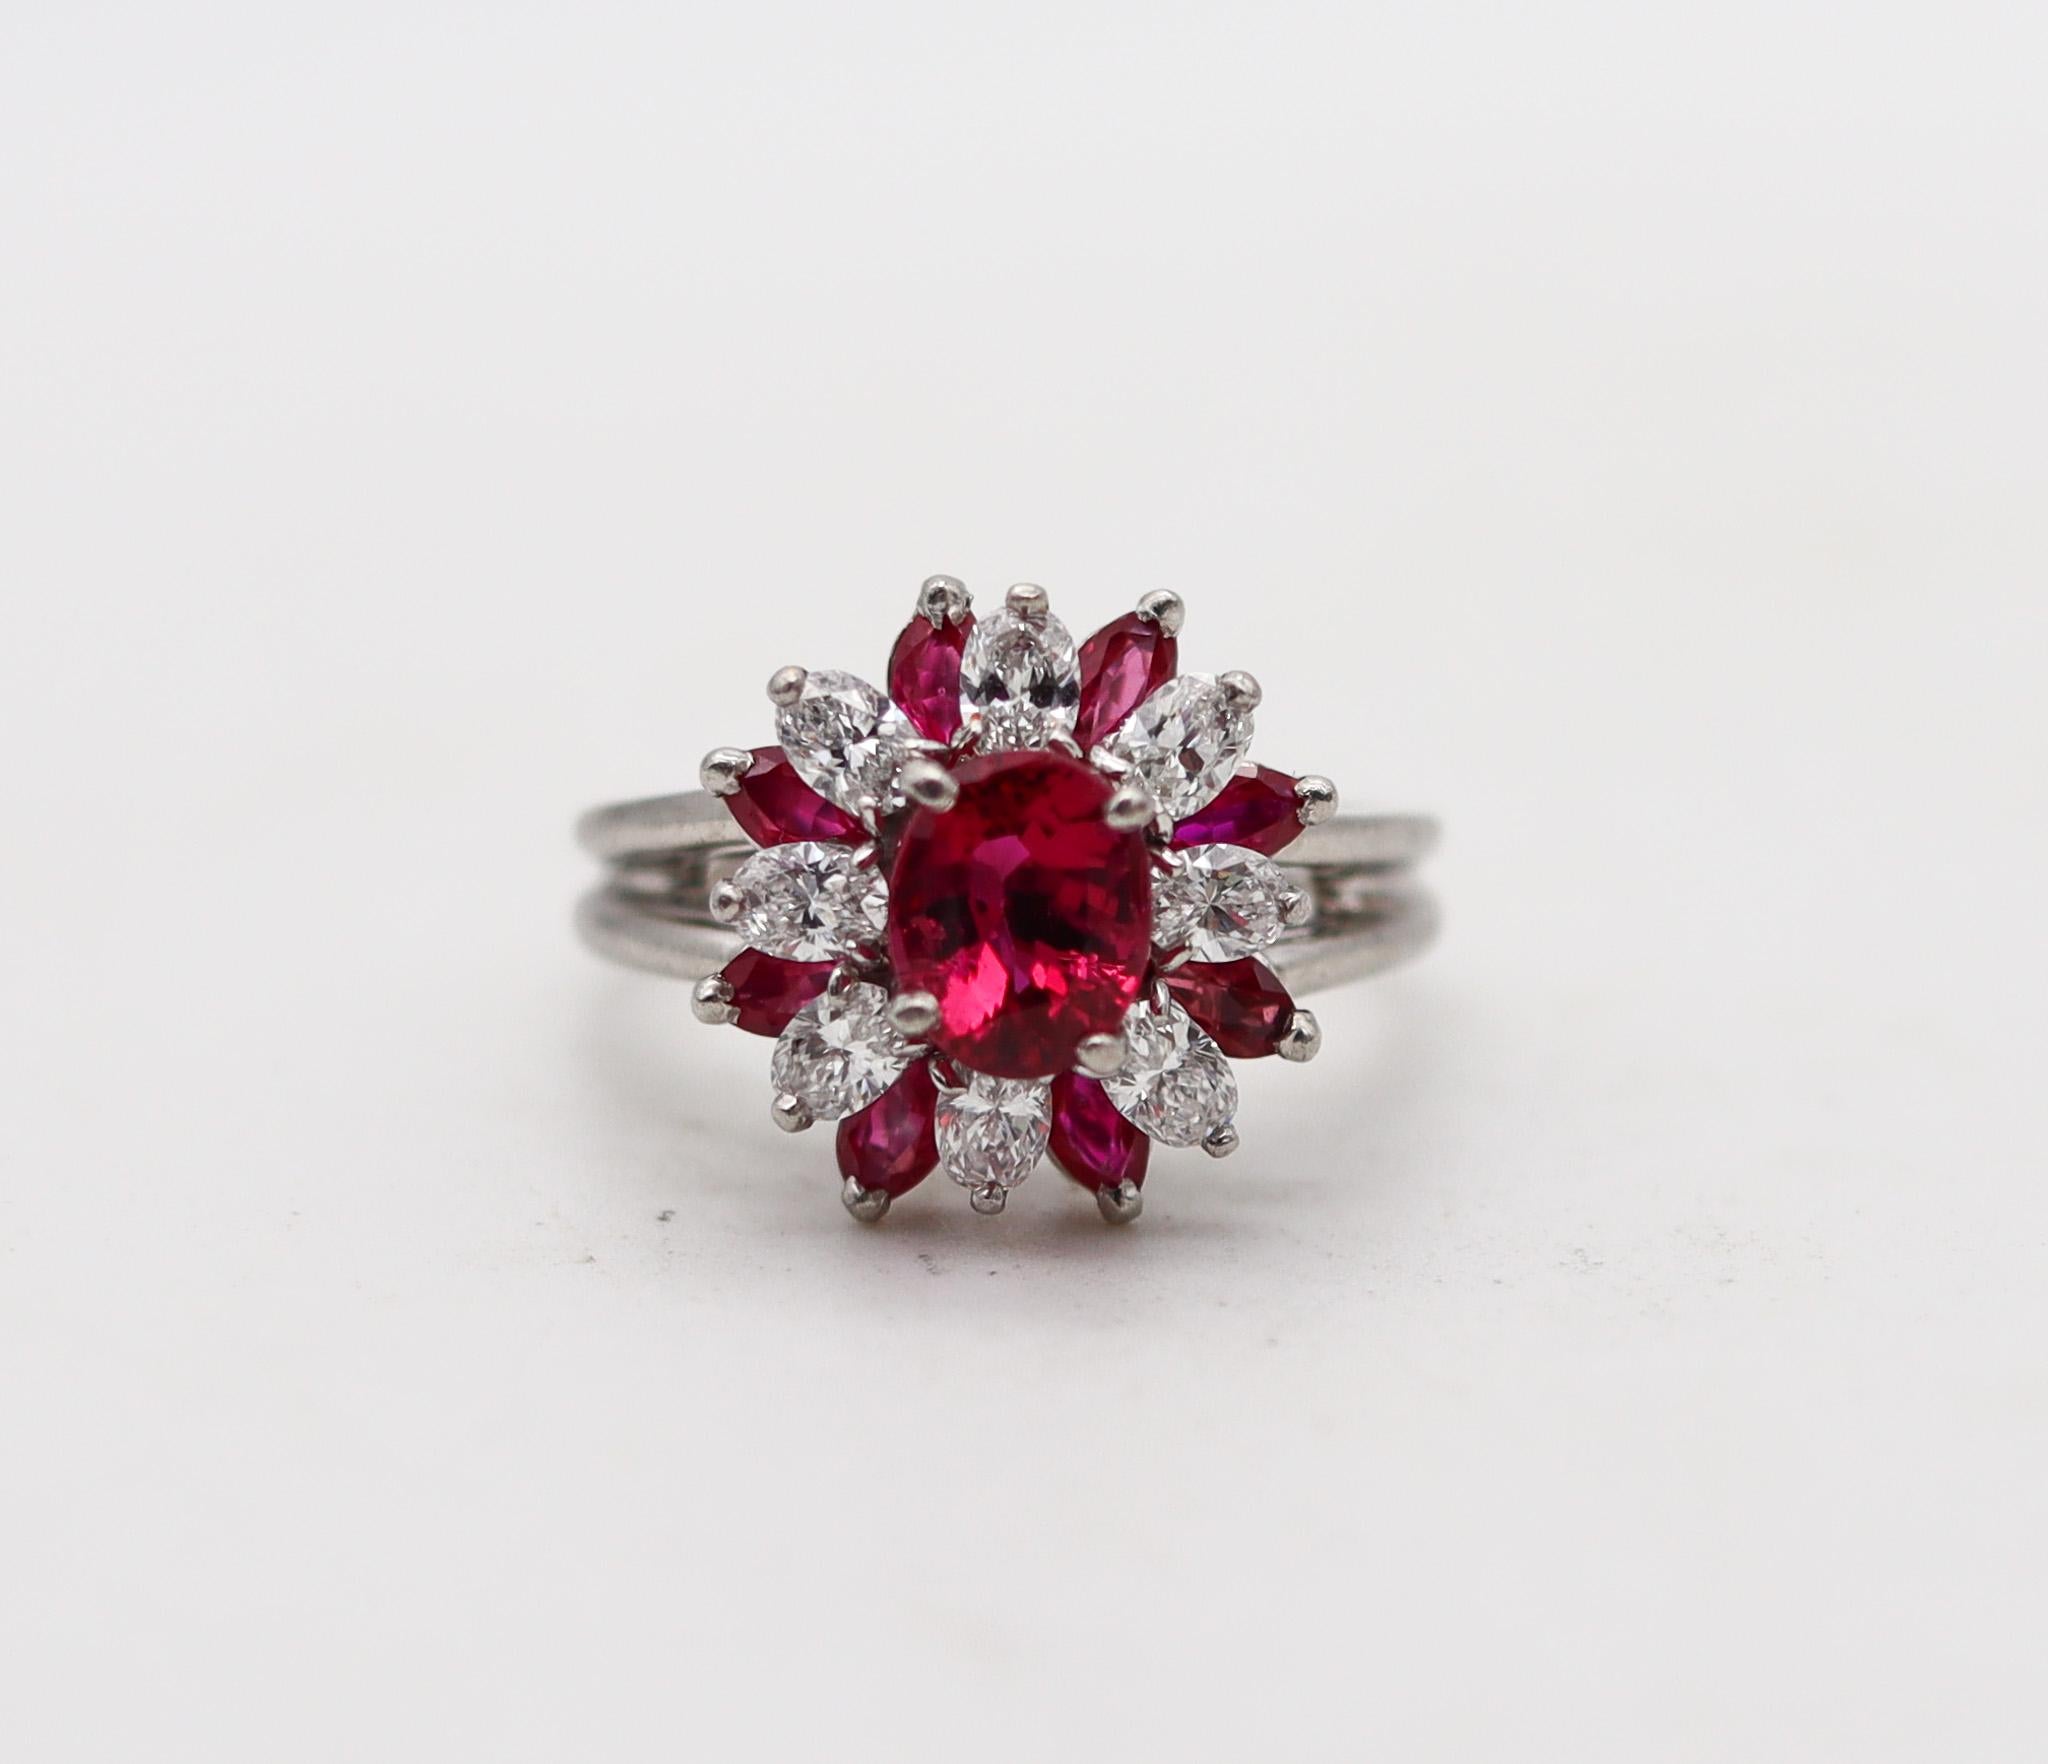 Modernist Oscar Heyman Cocktail Ring In 18Kt Gold With 2.62 Ctw In Diamonds And Rubies